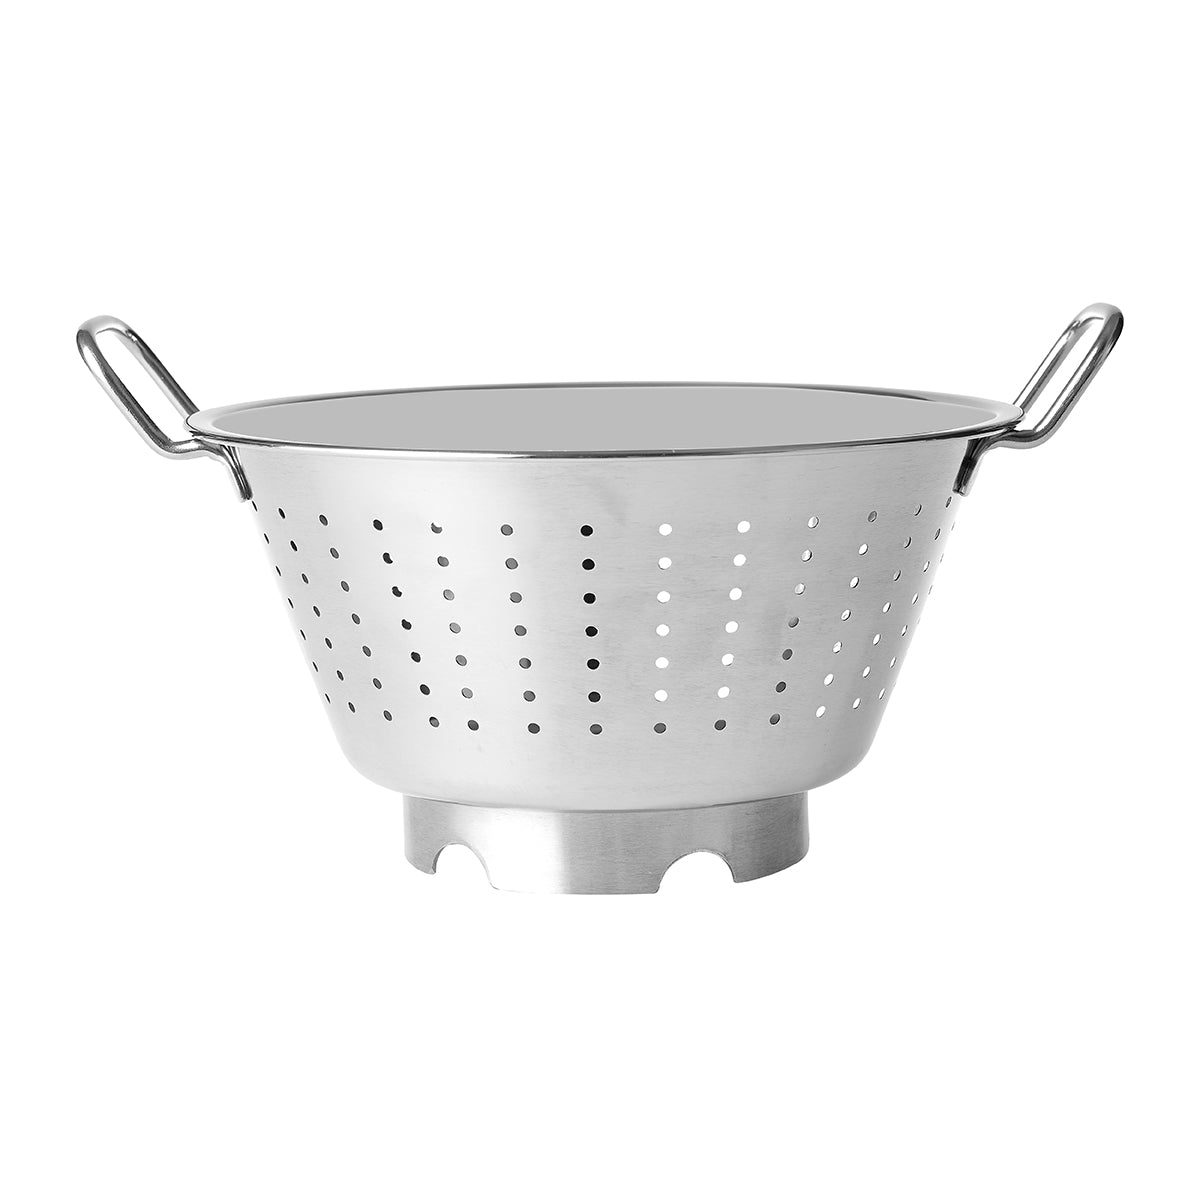 70220 Chef Inox Colander Footed Stainless Steel 320mm Tomkin Australia Hospitality Supplies